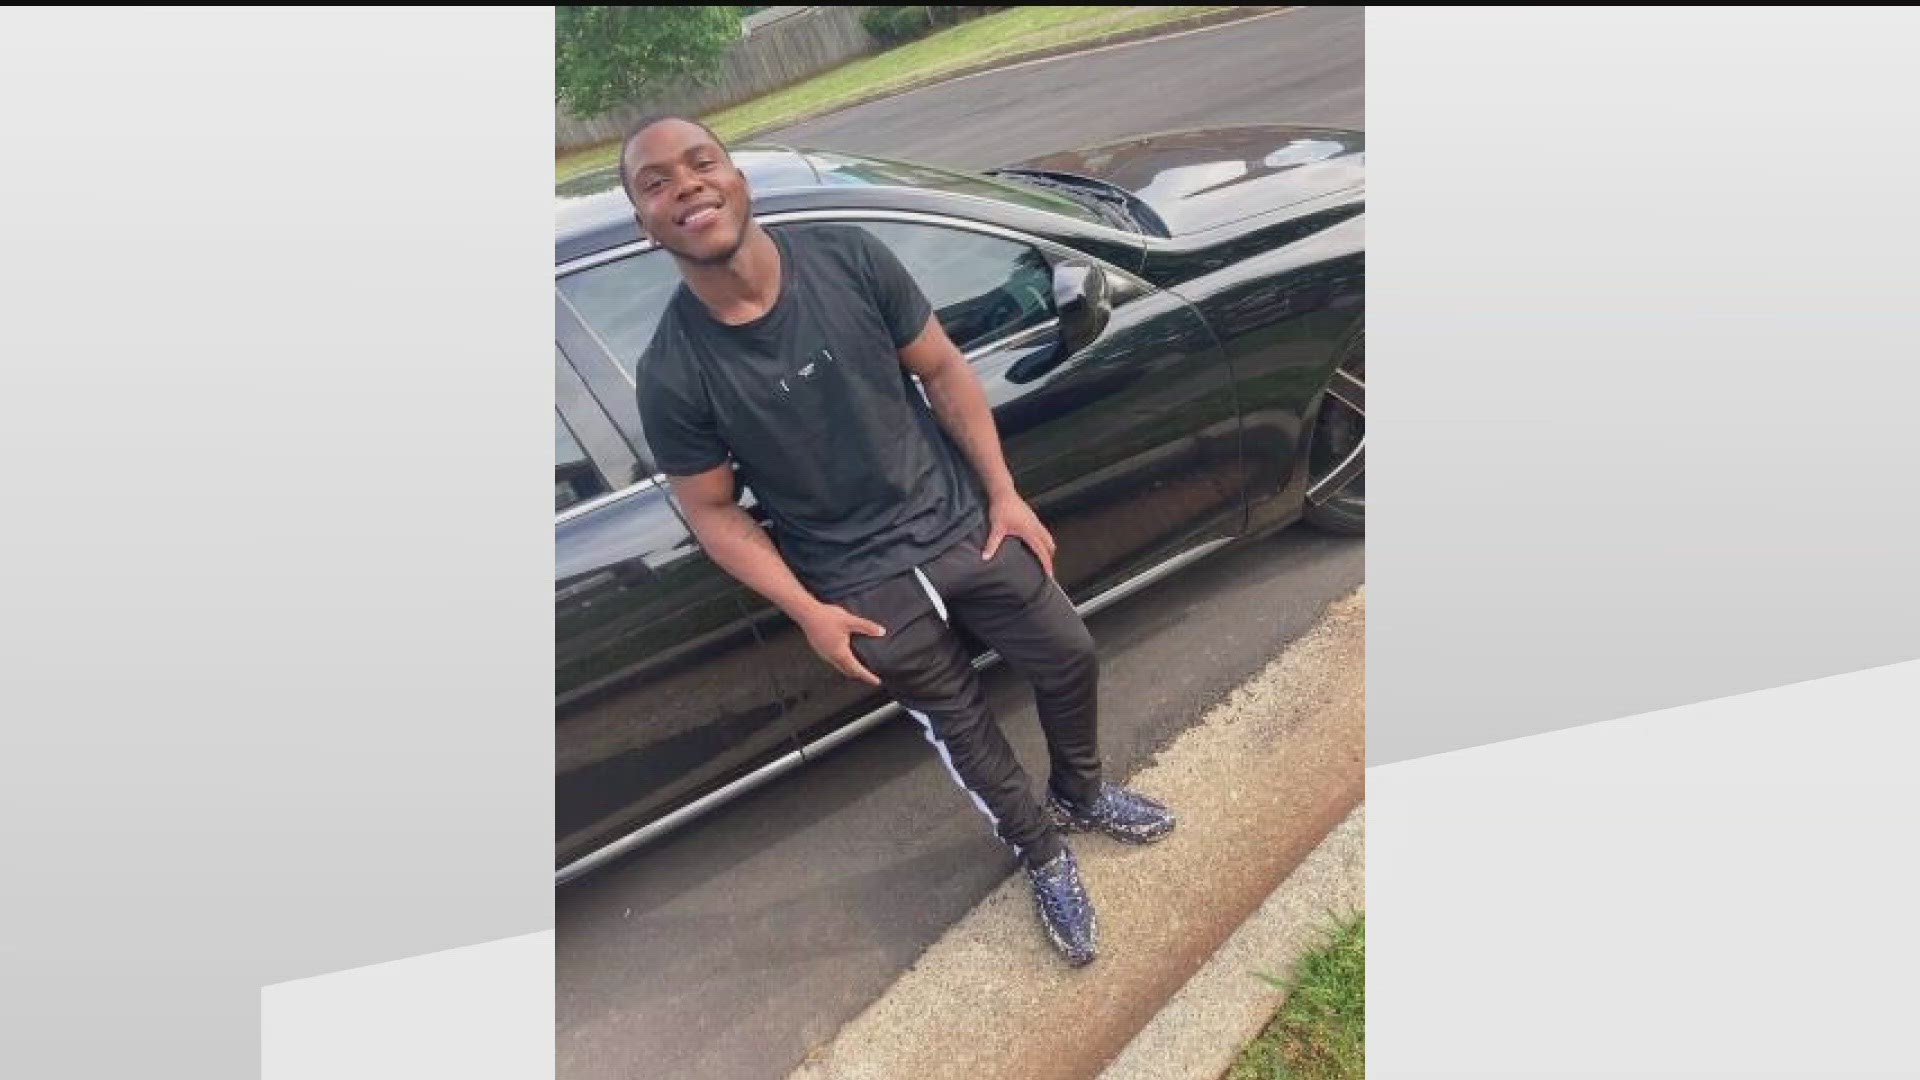 In an update on Monday, Gwinnett Police identified the victim as 21-year-old Jonathan Royce Wiley Jr.